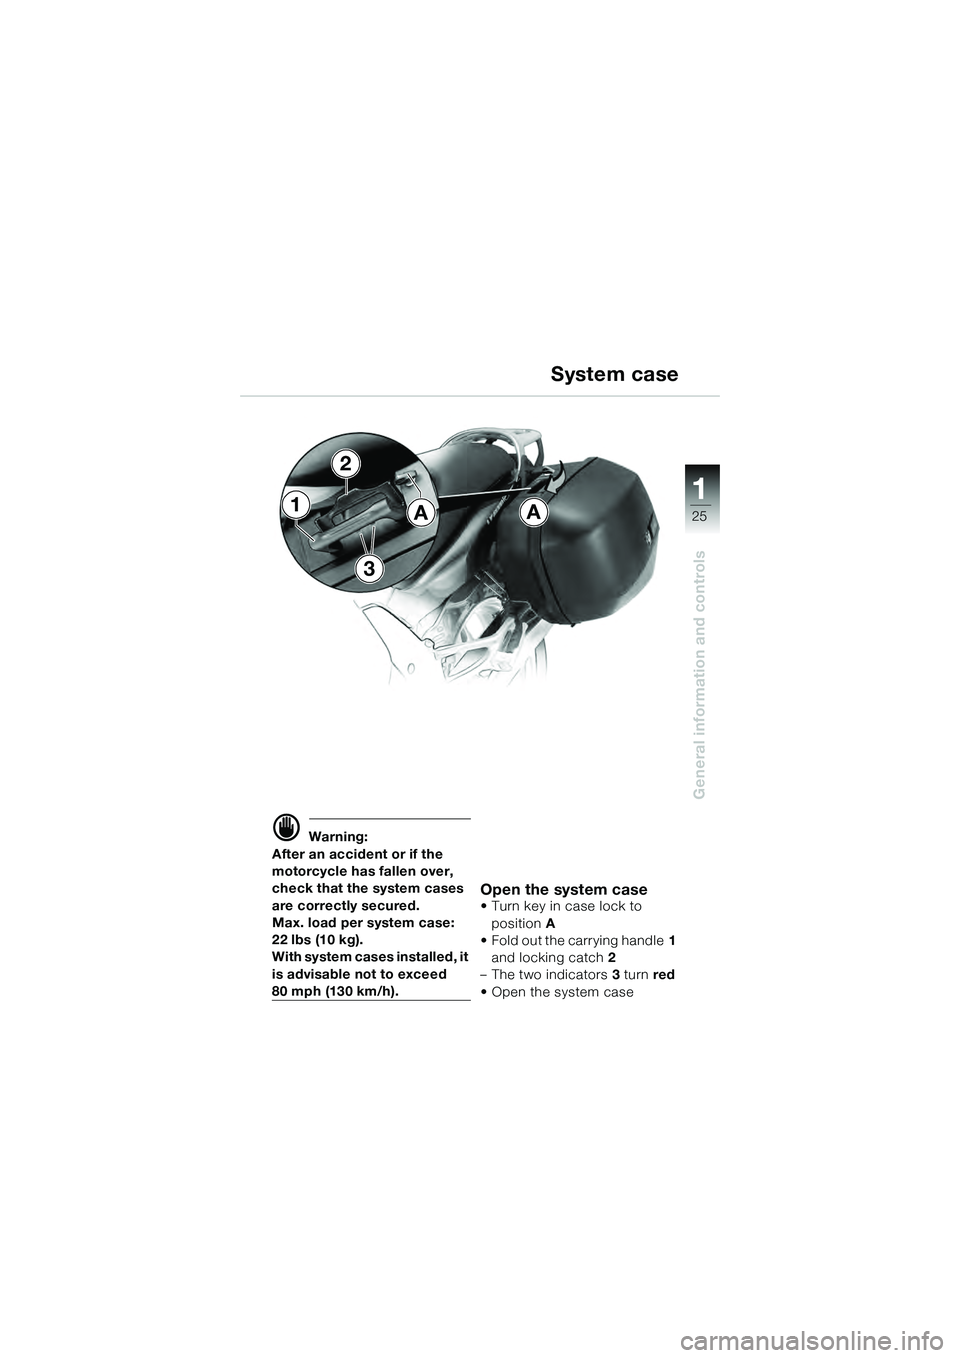 BMW MOTORRAD K 1200 GT 2004  Riders Manual (in English) 25
General information and controls
1
 Warning:
After an accident or if the 
motorcycle has fallen over, 
check that the system cases 
are correctly secured.
Max. load per system case: 
22 lbs (10 kg